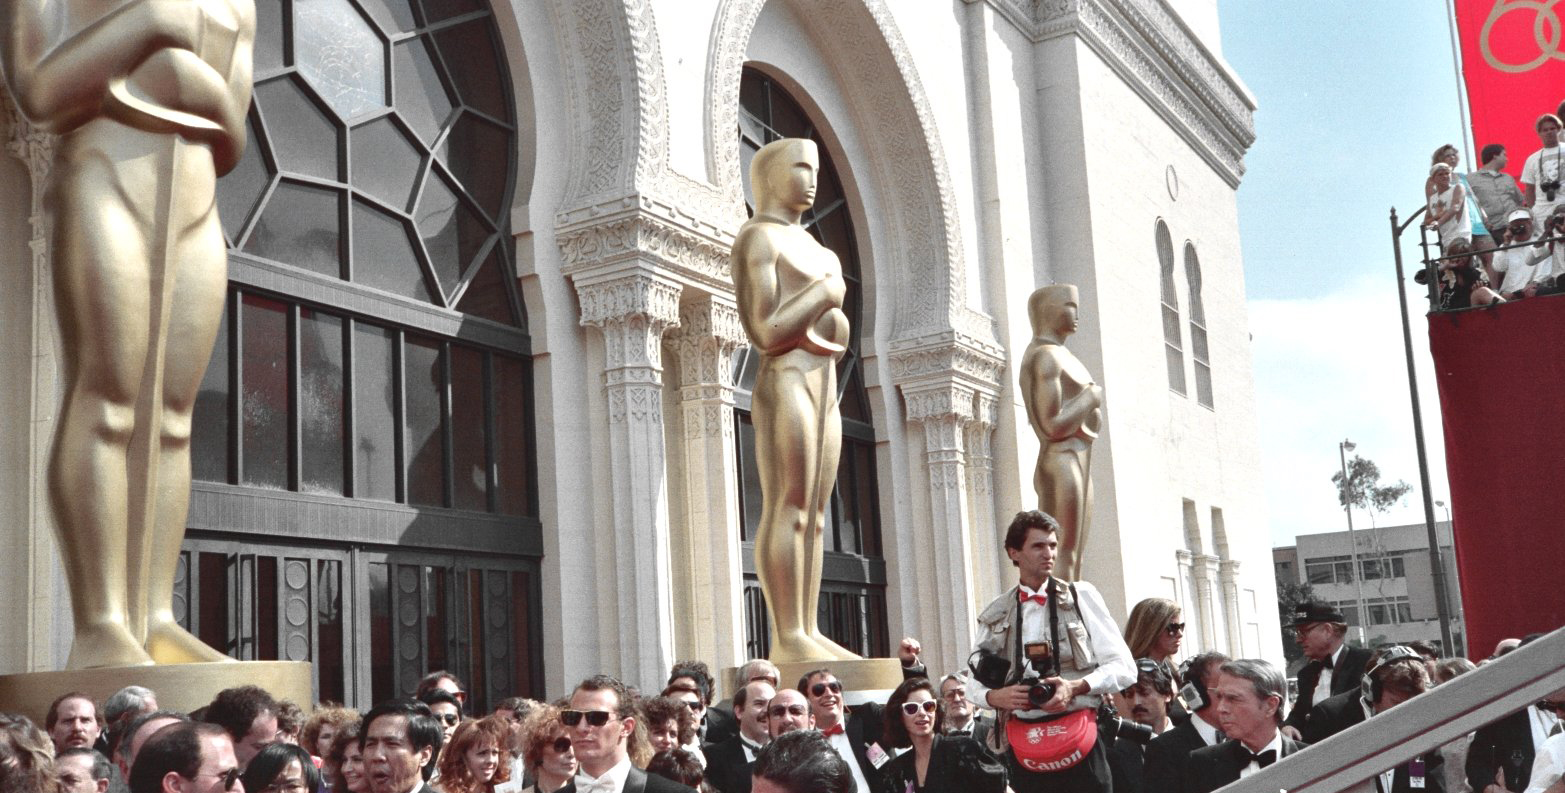 The Bournemouth Rock is running its first Oscars live blog